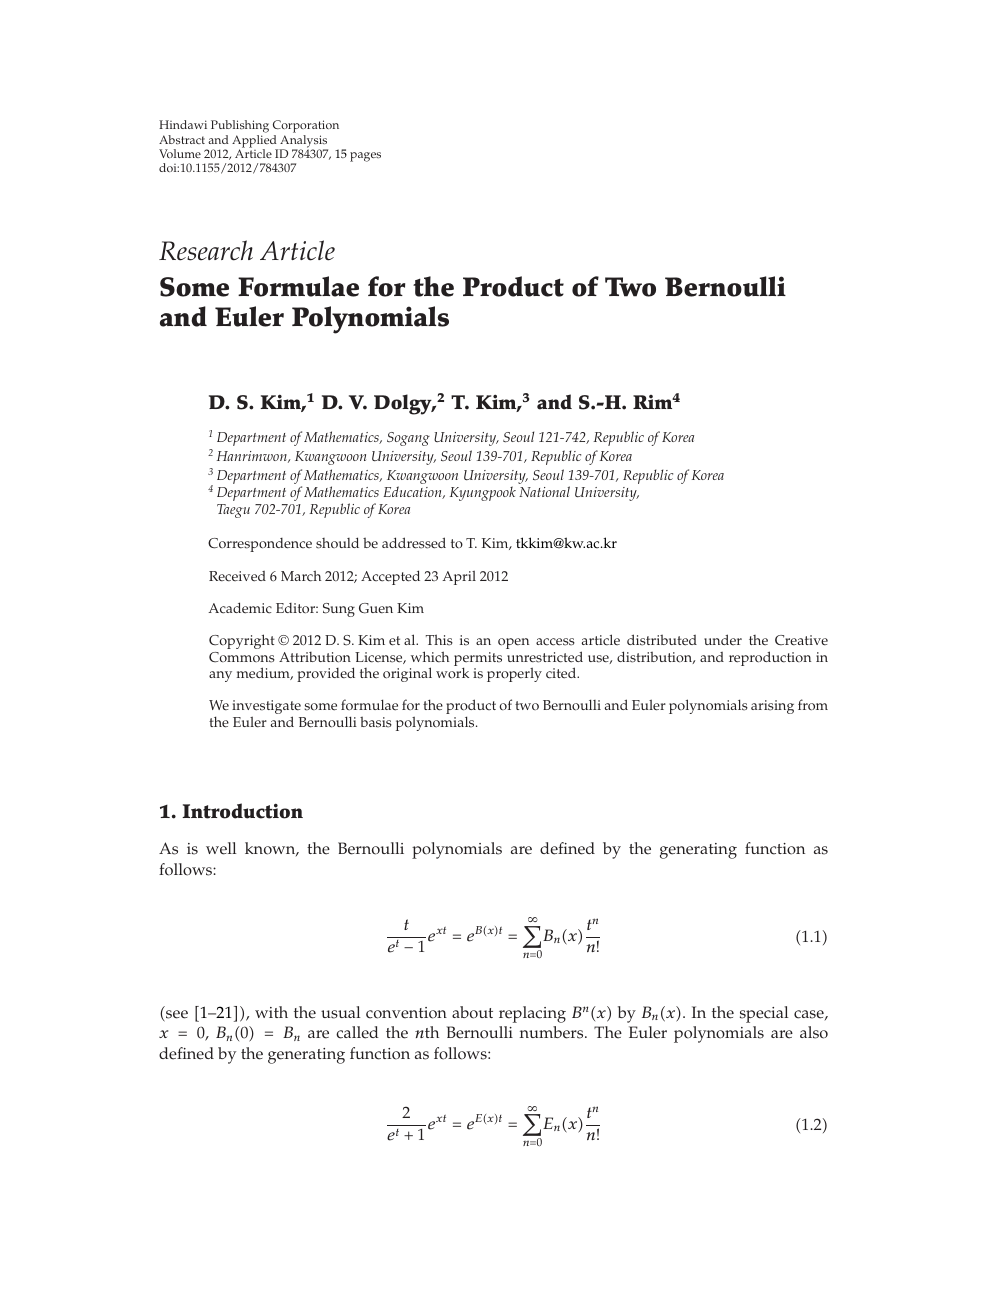 Some Formulae For The Product Of Two Bernoulli And Euler Polynomials Topic Of Research Paper In Mathematics Download Scholarly Article Pdf And Read For Free On Cyberleninka Open Science Hub